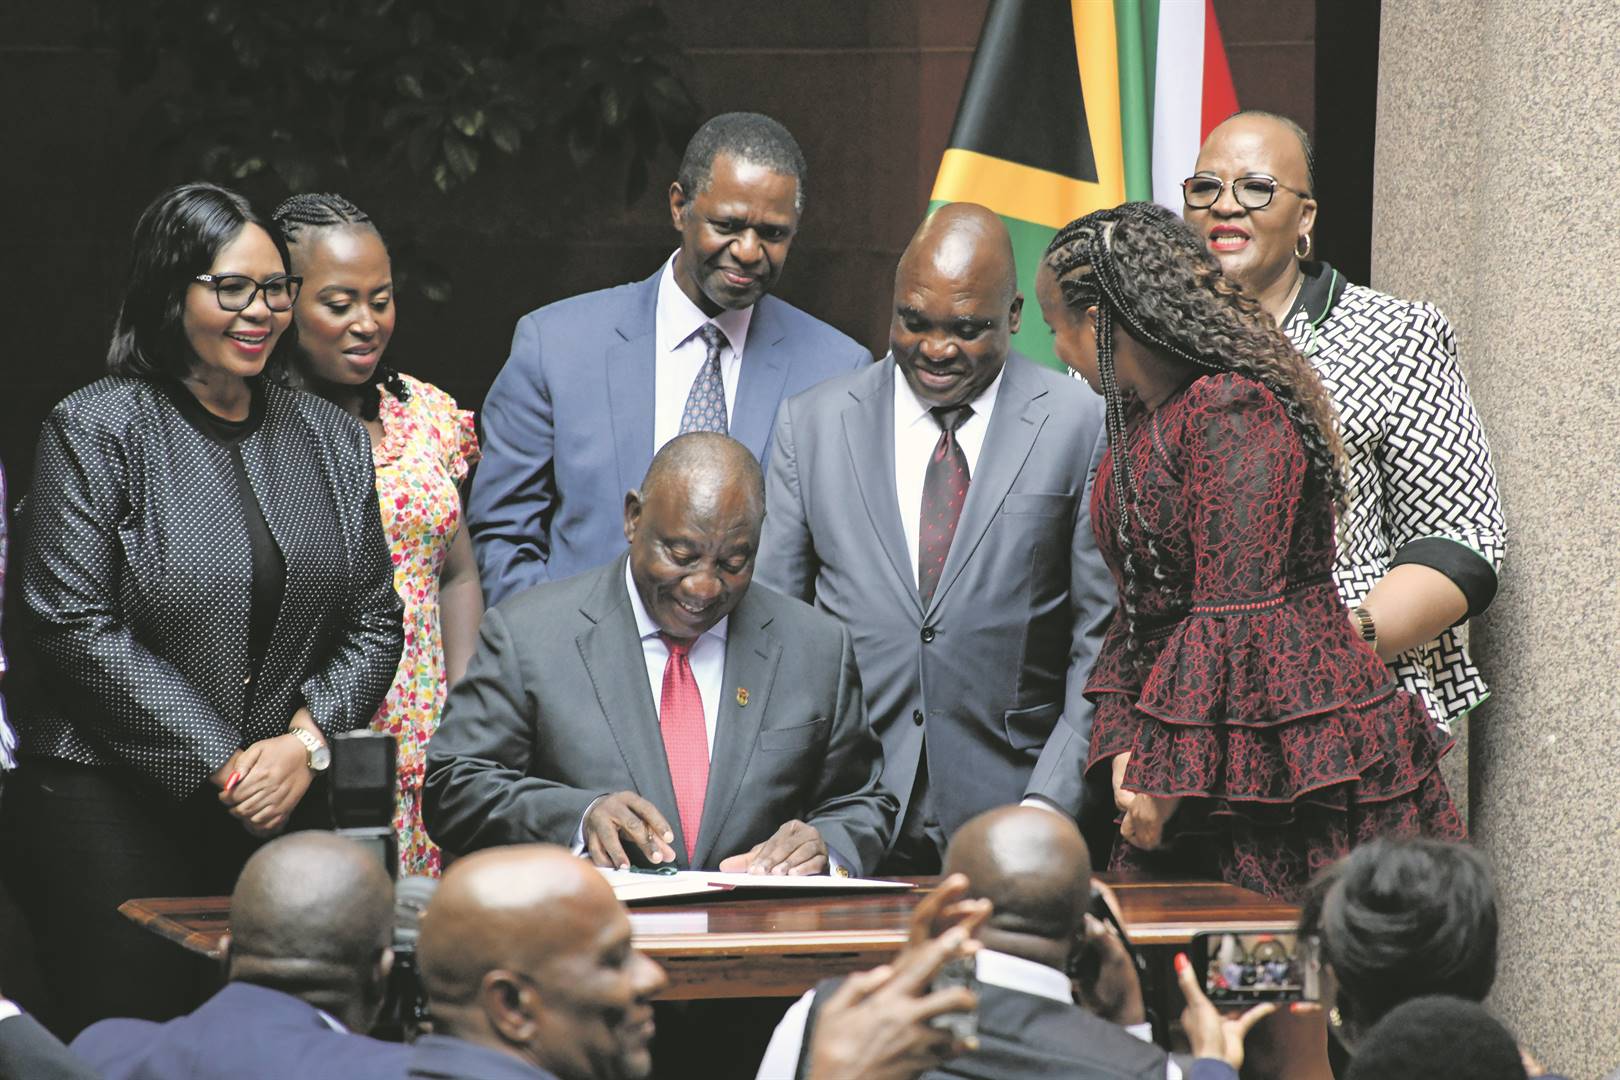 Cyril Ramaphosa and Joe Phaahla at the public signing into law of the NHI Bill.